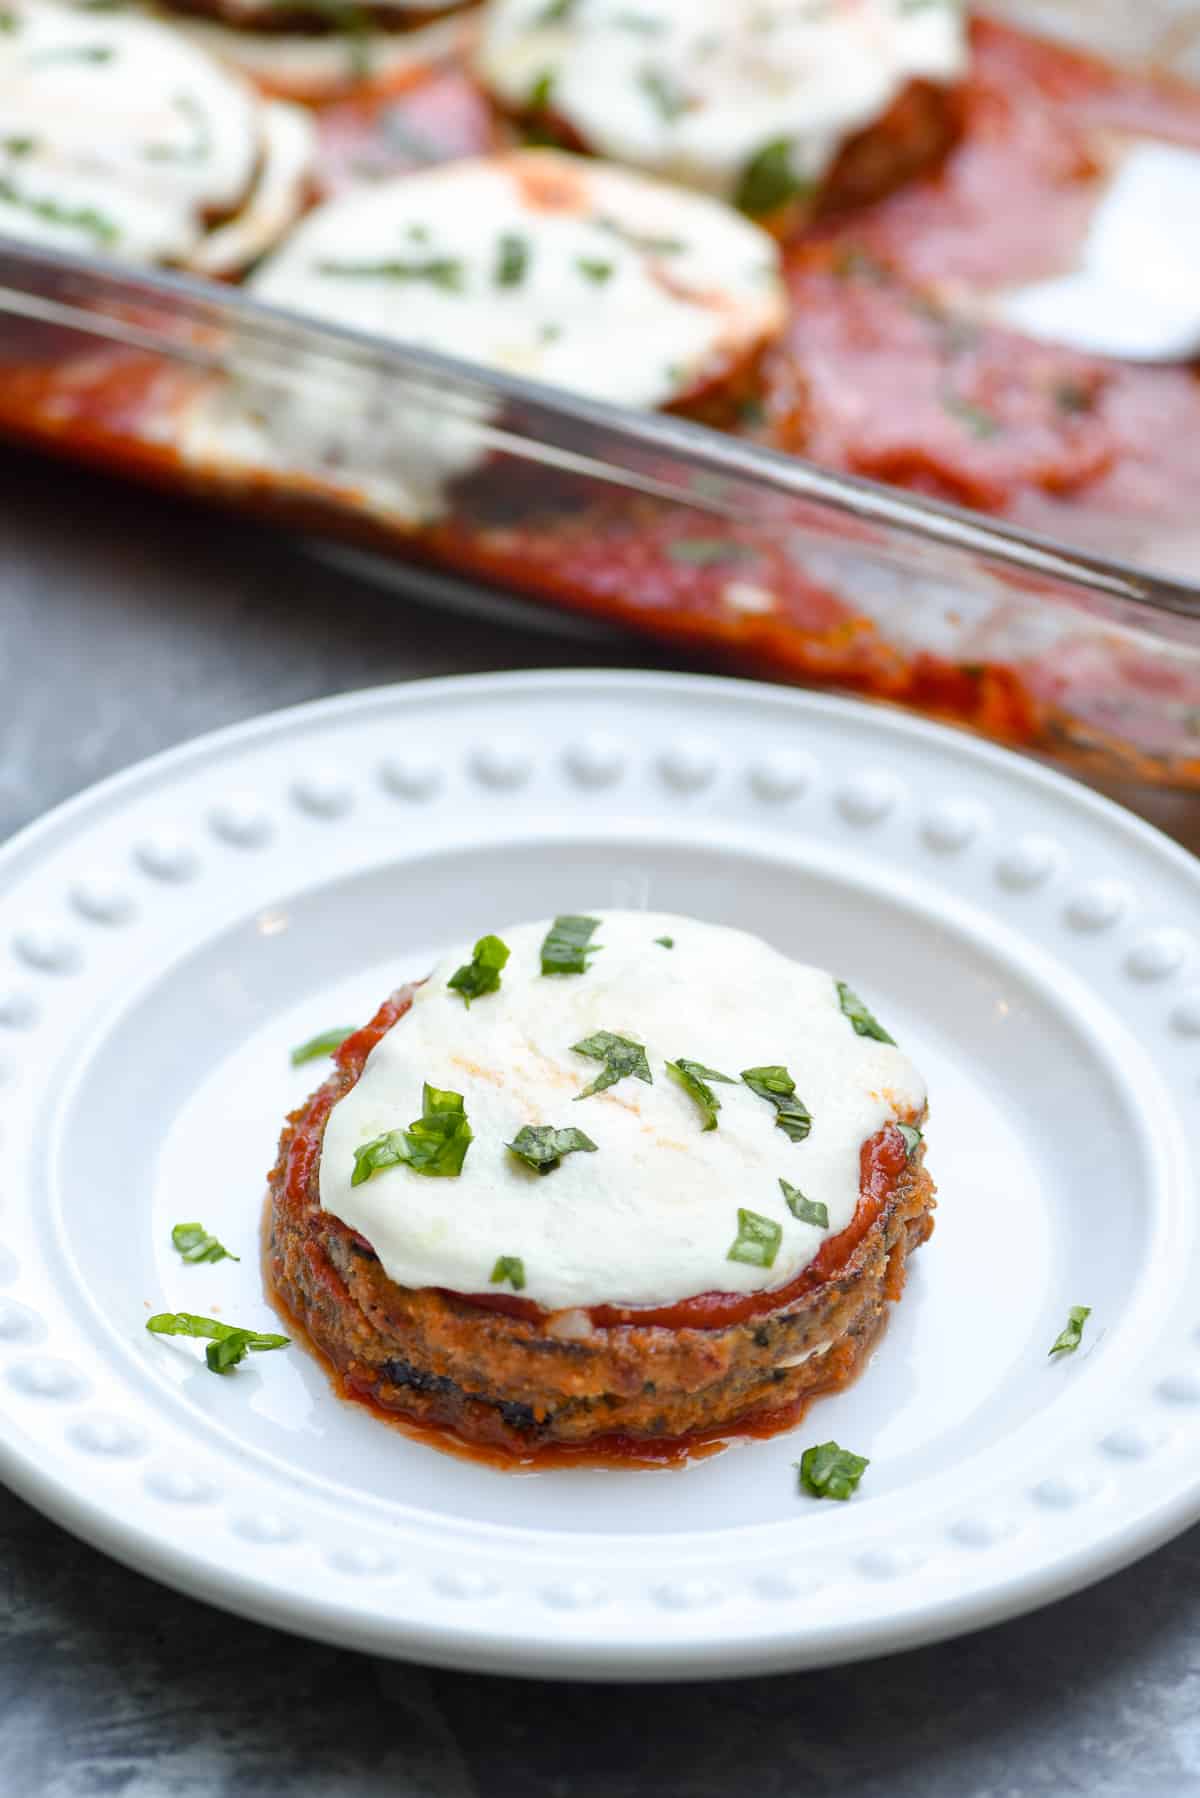 A serving of baked eggplant parmesan on a white plate.